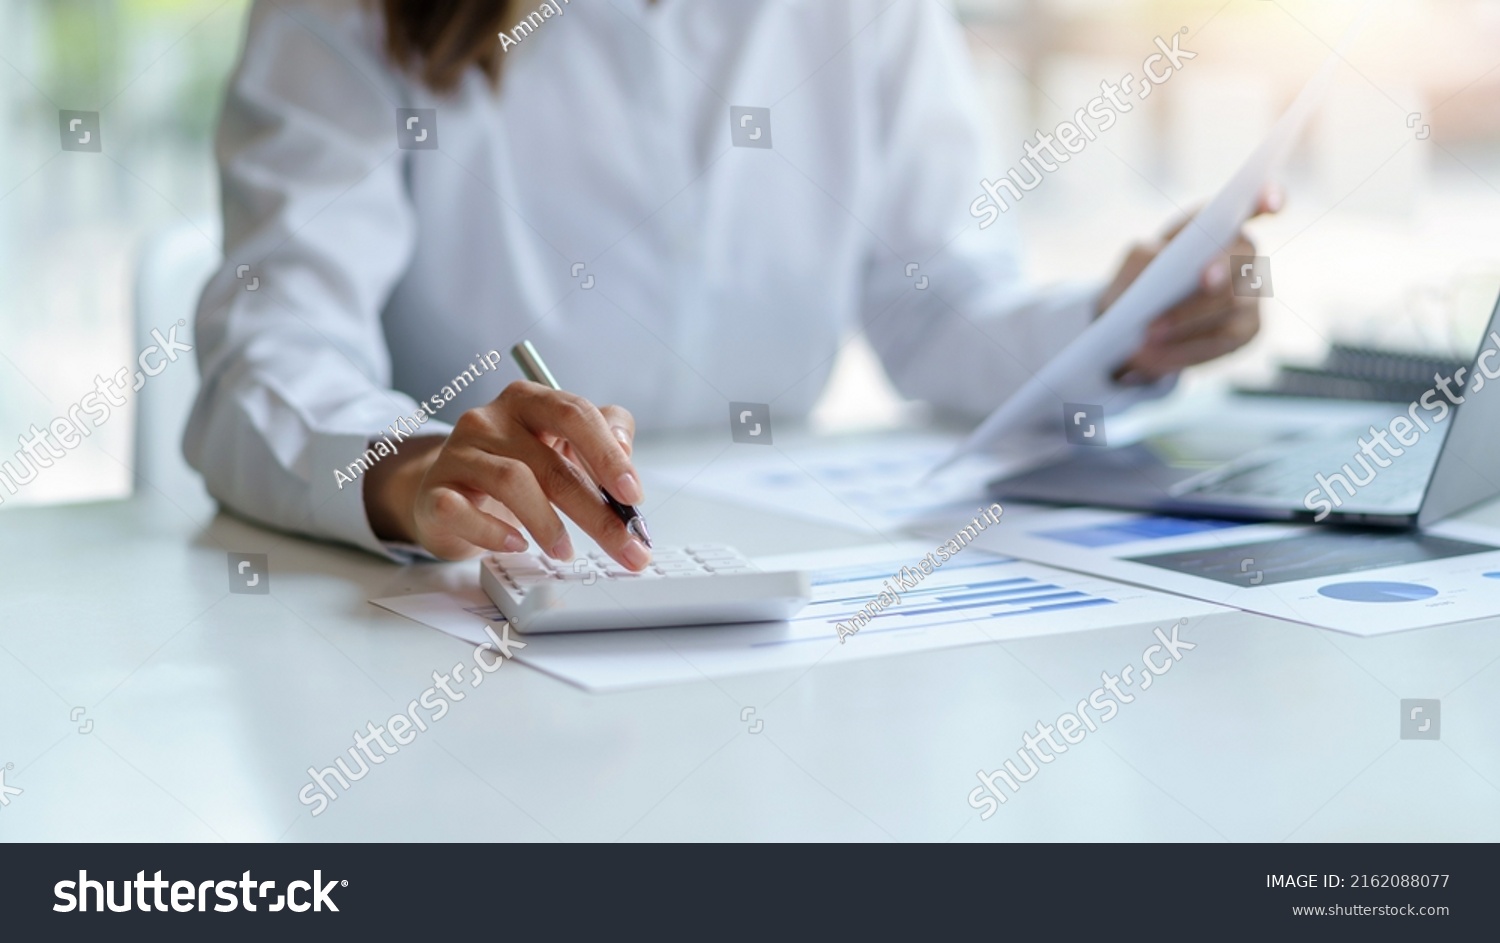 Close-up of businesswoman hands using a calculator to check company finances and earnings and budget. Business woman calculating monthly expenses, managing budget,  papers, loan documents, invoices. #2162088077